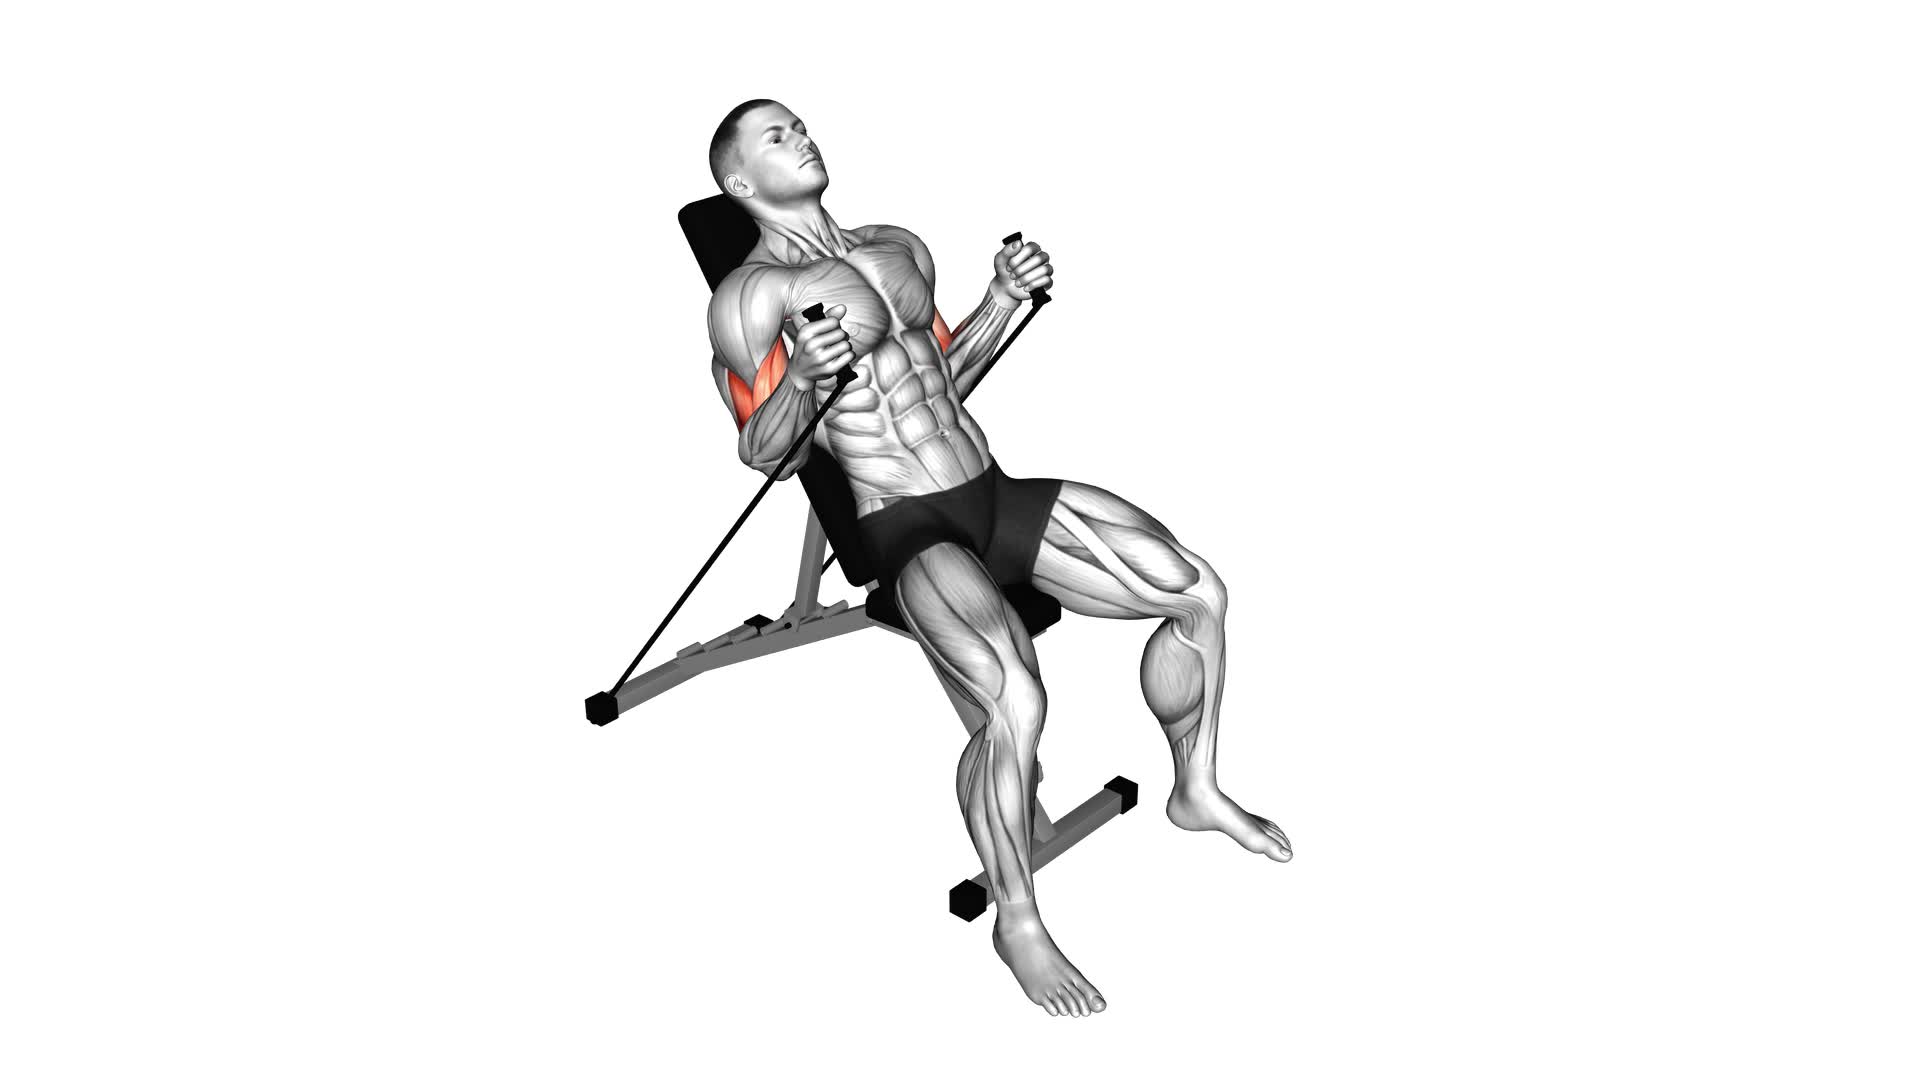 Band Incline Hammer Curl - Video Exercise Guide & Tips